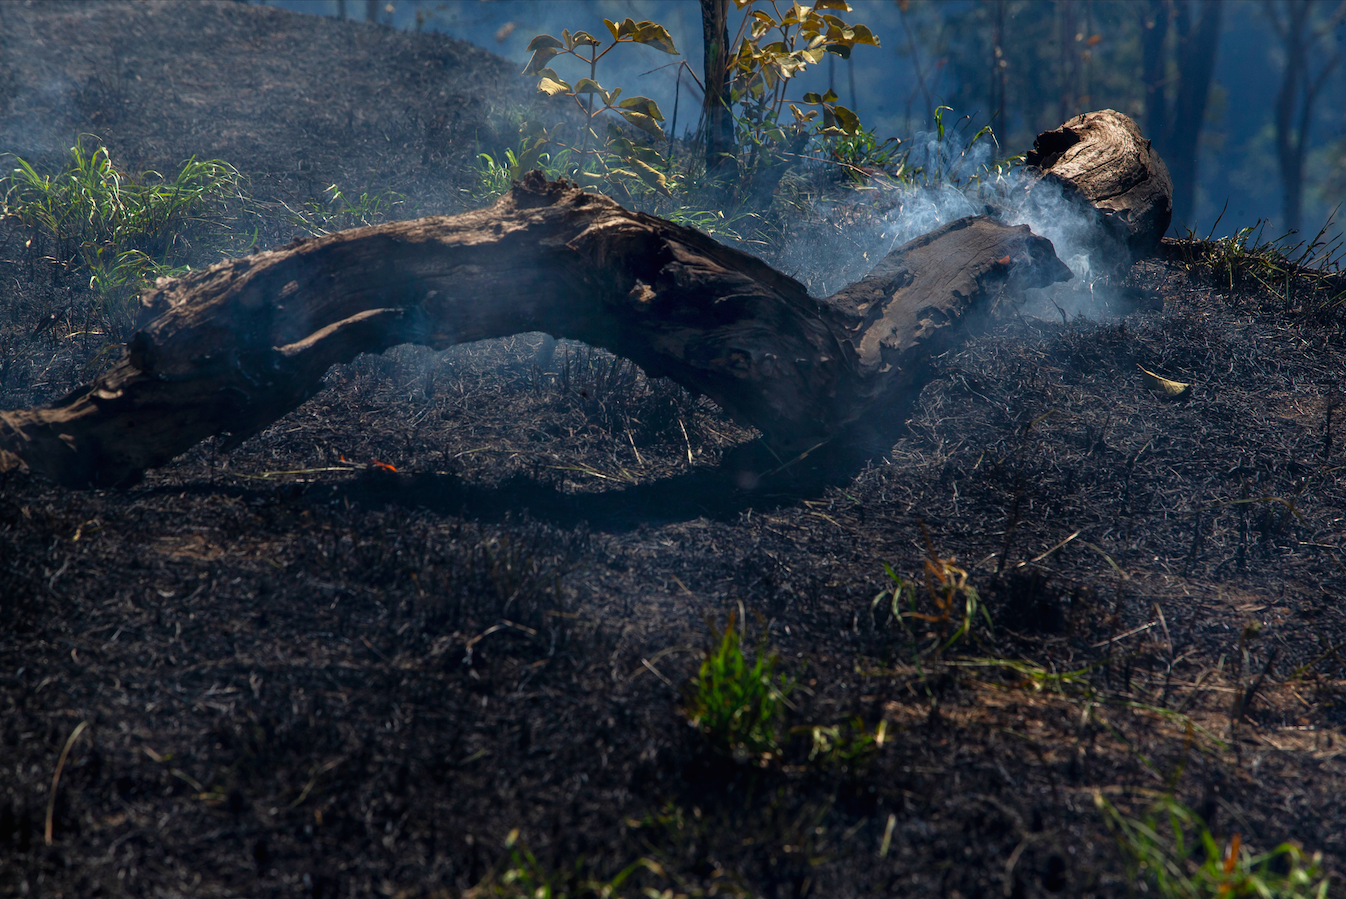 Flames raises from a trunk in a farm at Pocone village, 104 km from Cuiaba in Mato Grosso, due the dry weather season. Image by Antonio Scorza/Shutterstock. Brazil, 2020.